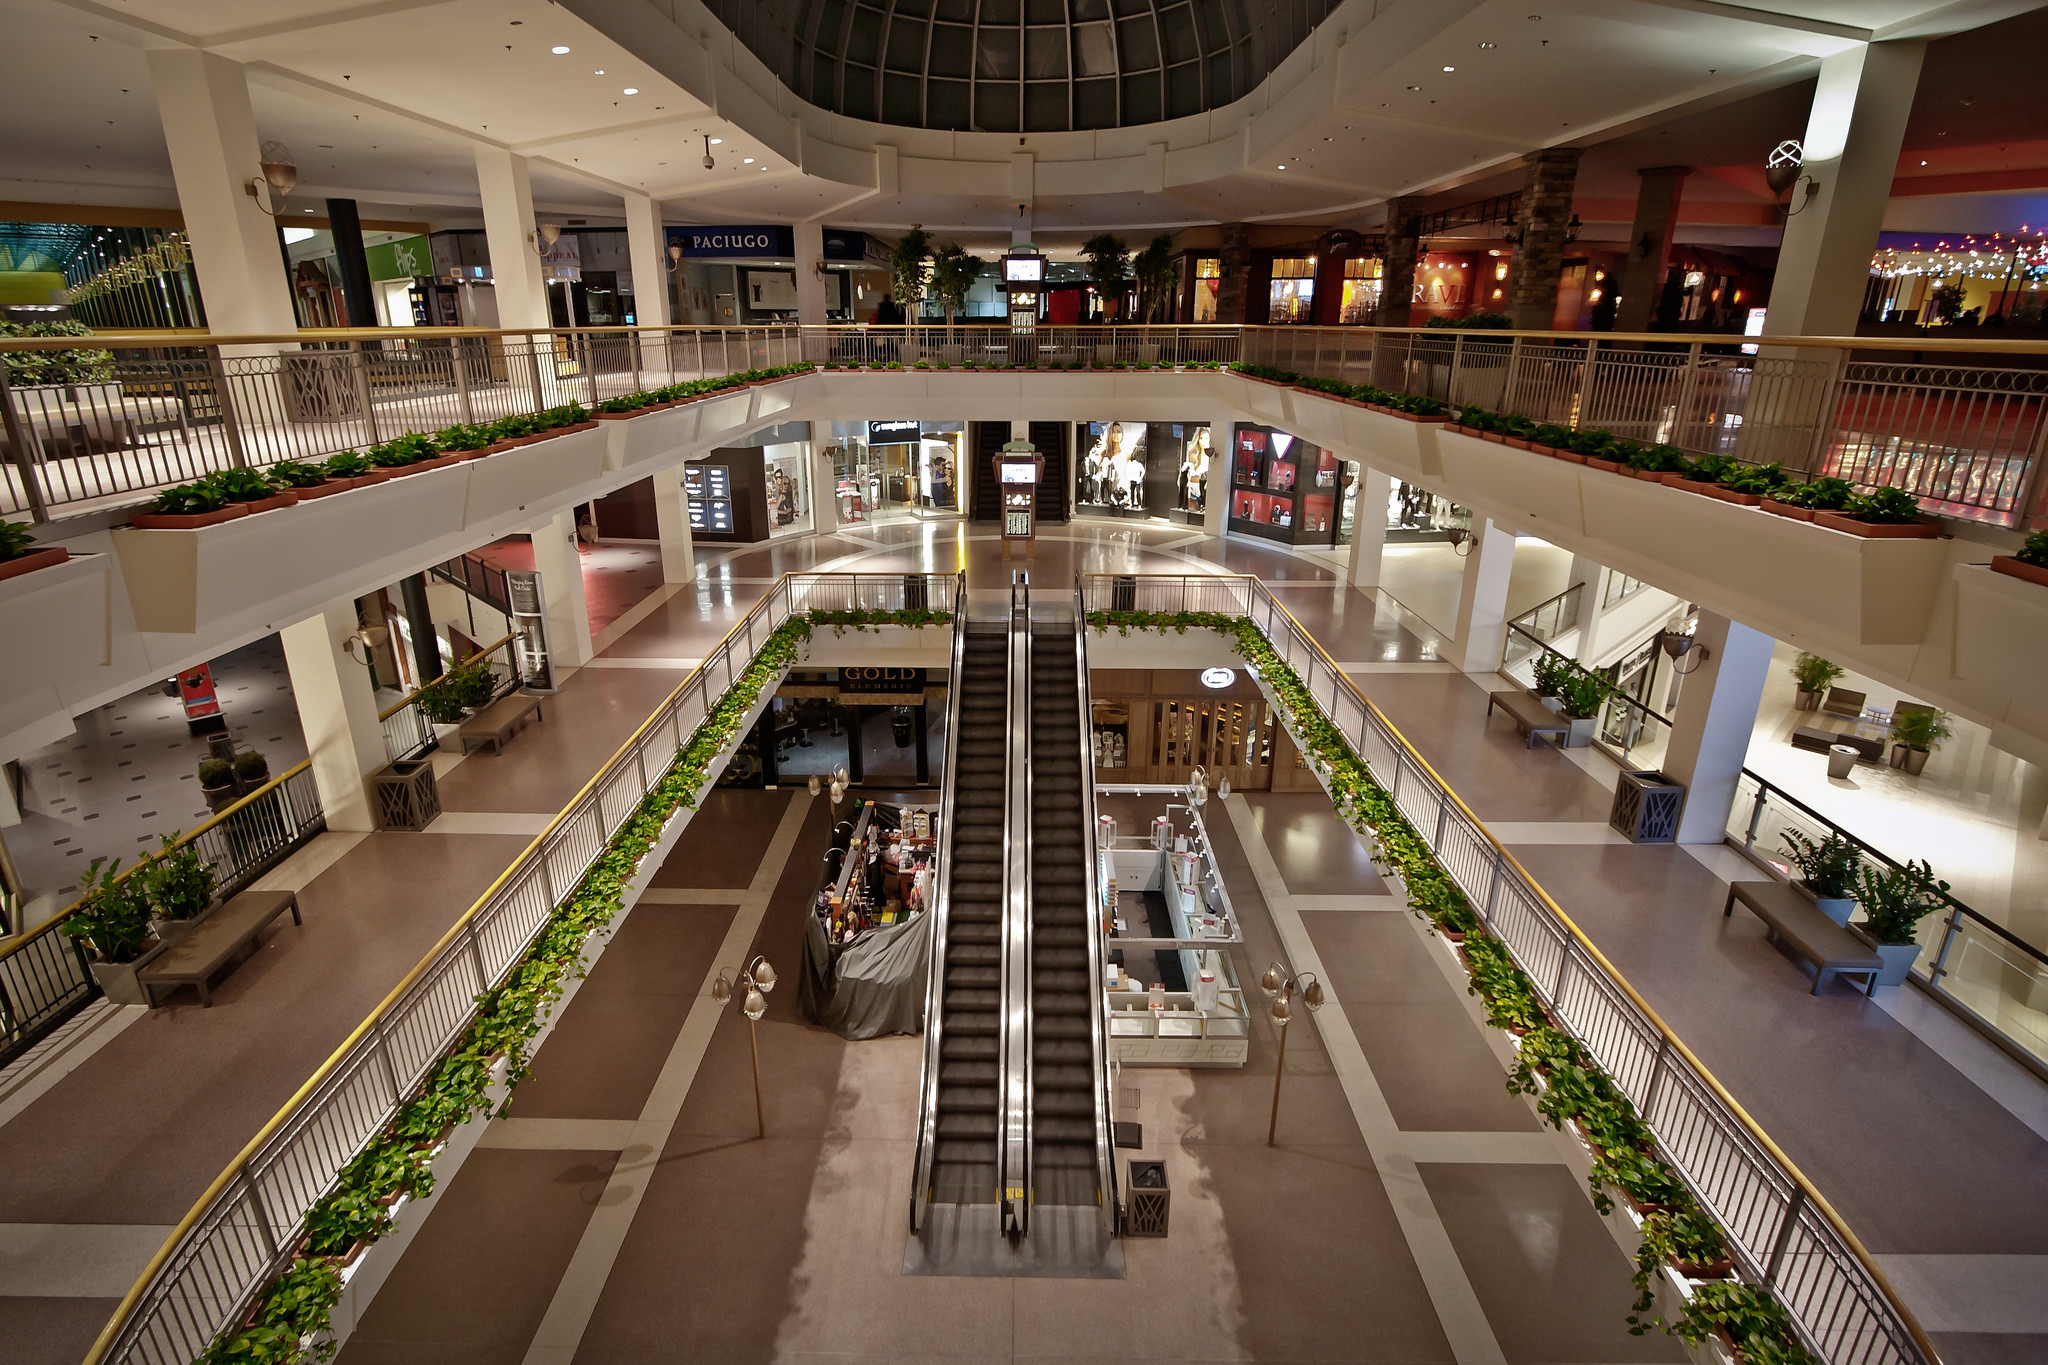 Top 20 Largest Malls In America - www.inf-inet.com